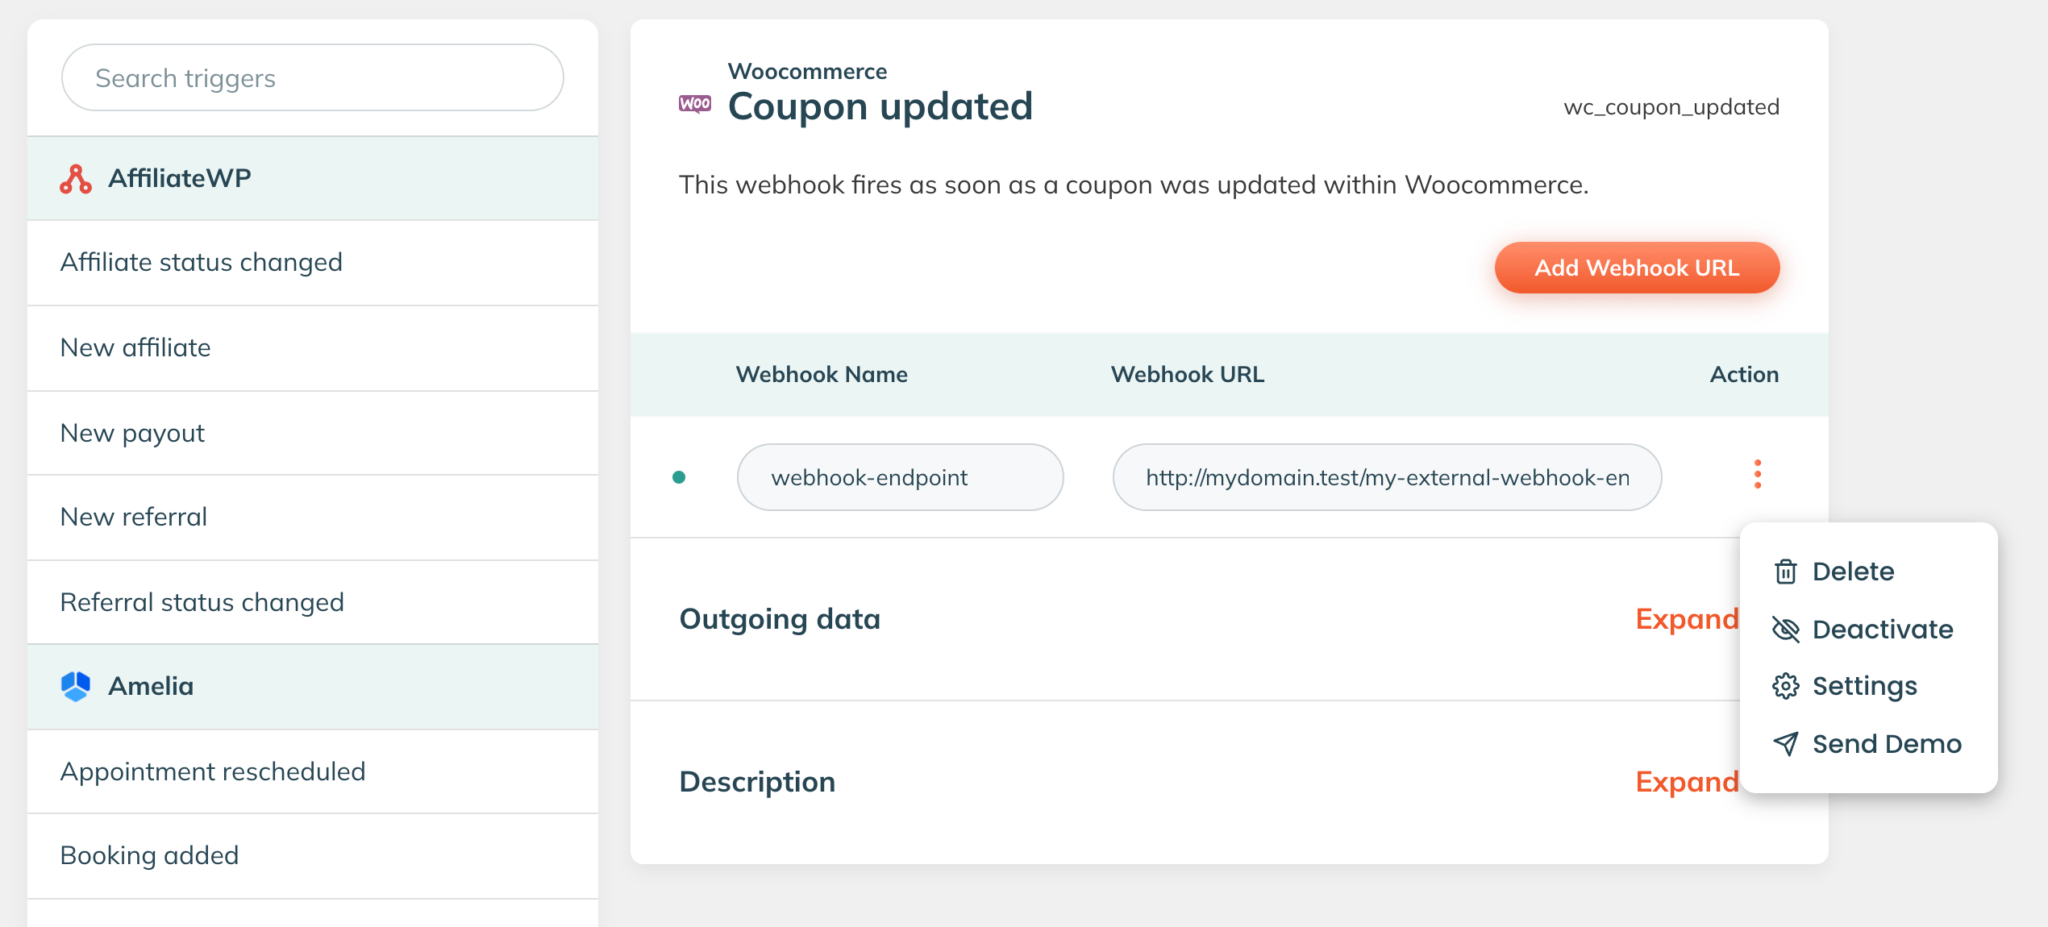 The WP Webhooks screen of the New referral trigger